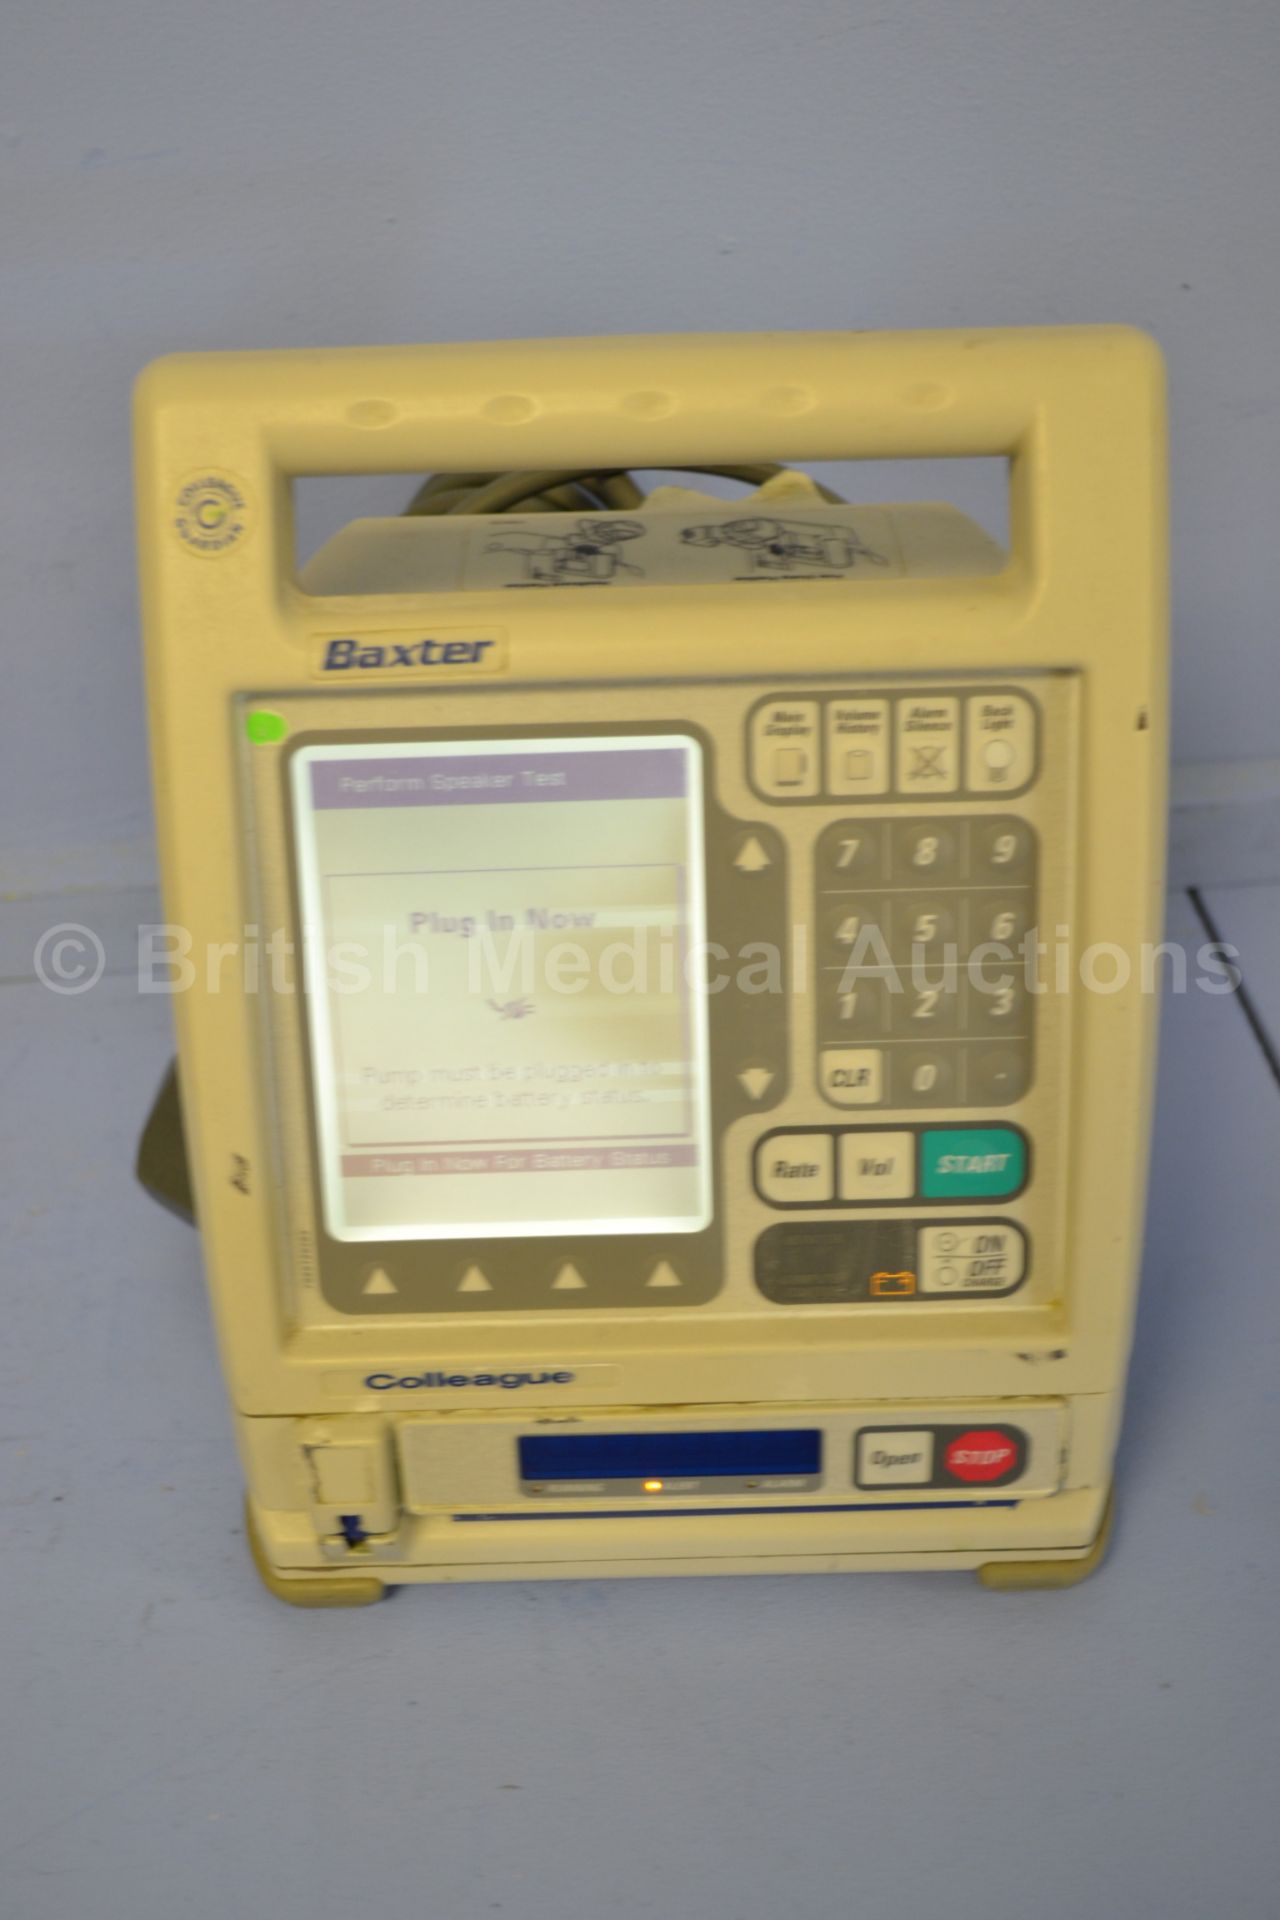 6 x Baxter Colleague Infusion Pumps - Image 4 of 4